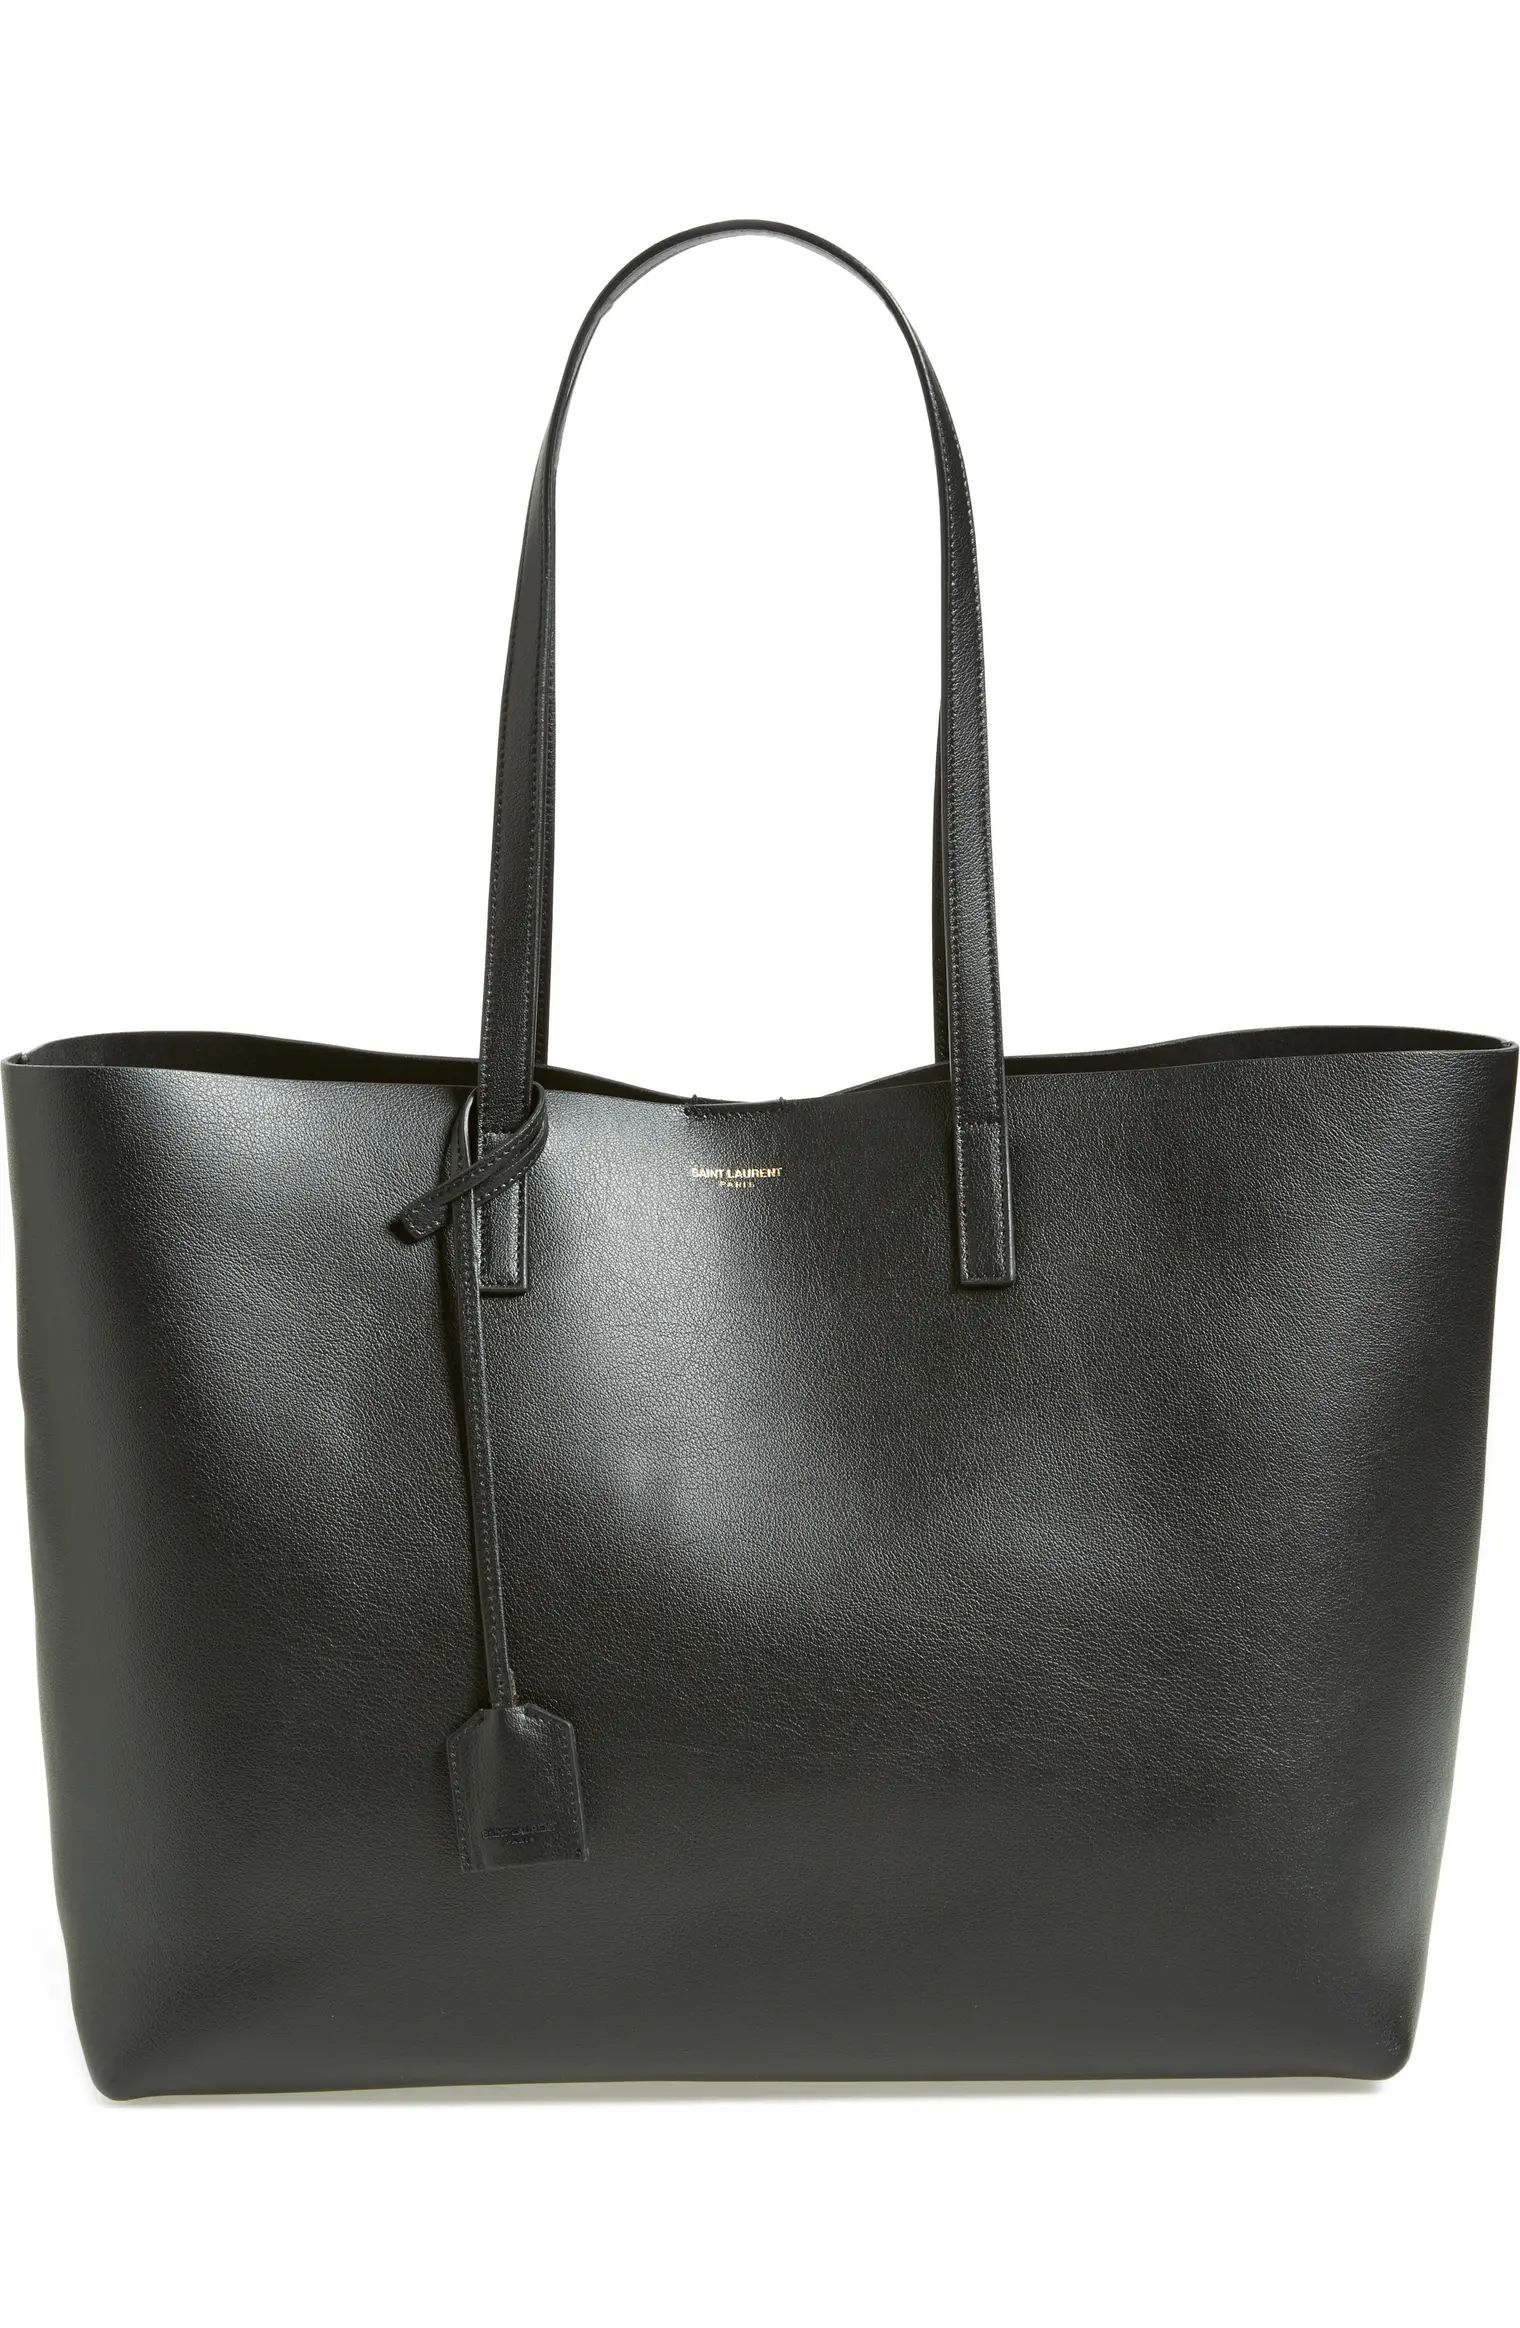 'Shopping' Leather Tote | Nordstrom